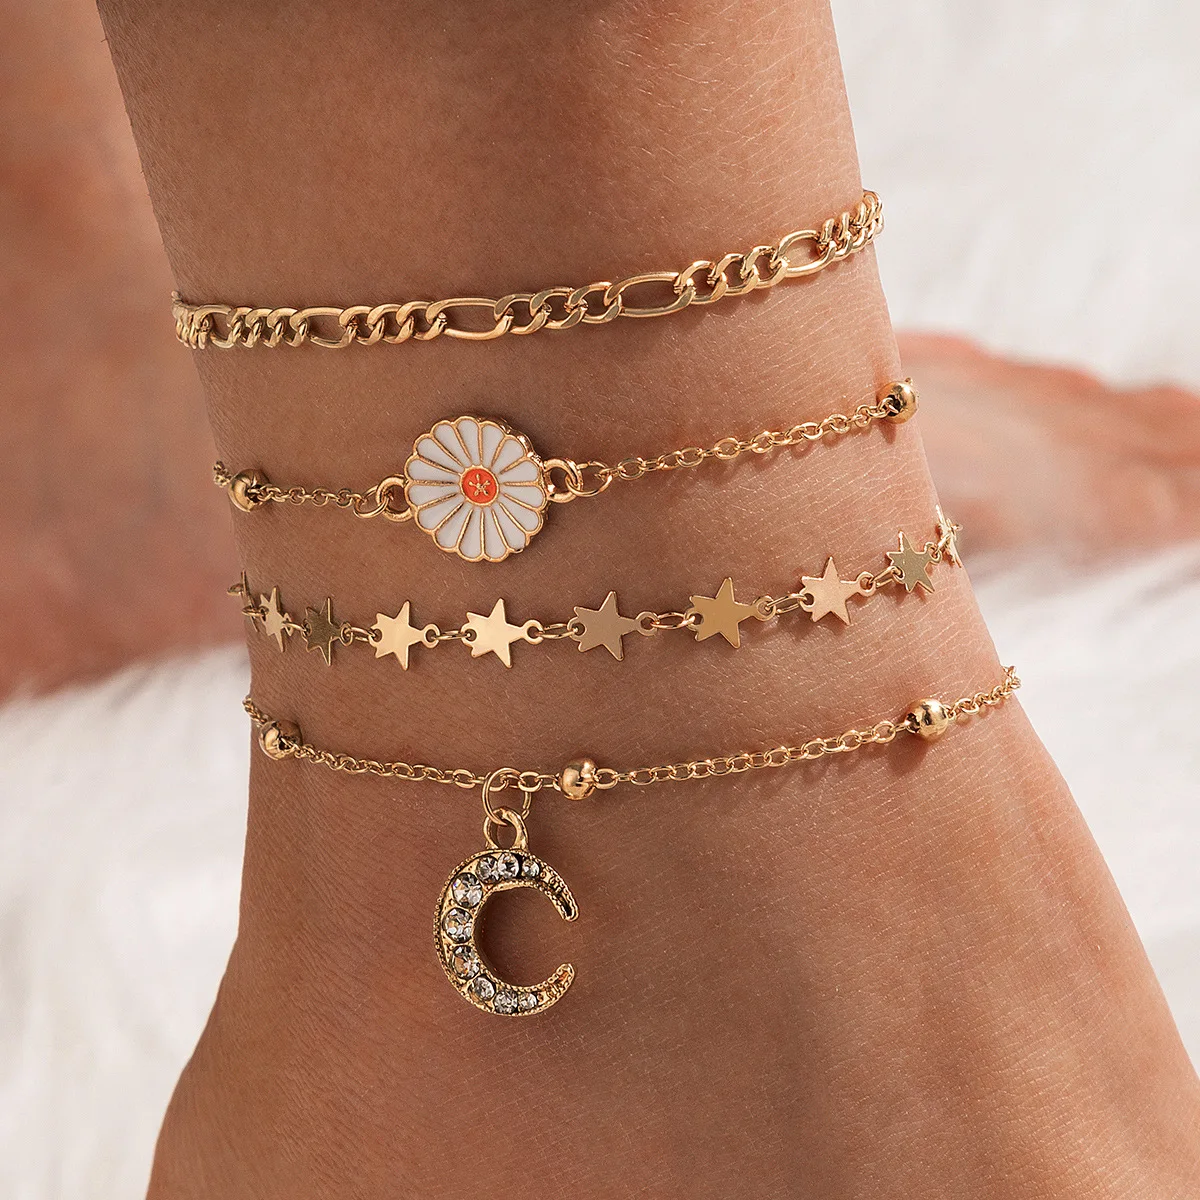 

4pcs set 18k Gold Plated White Enamel Daisy Charm Anklet Bracelet Layered Star Moon Anklet, As picture